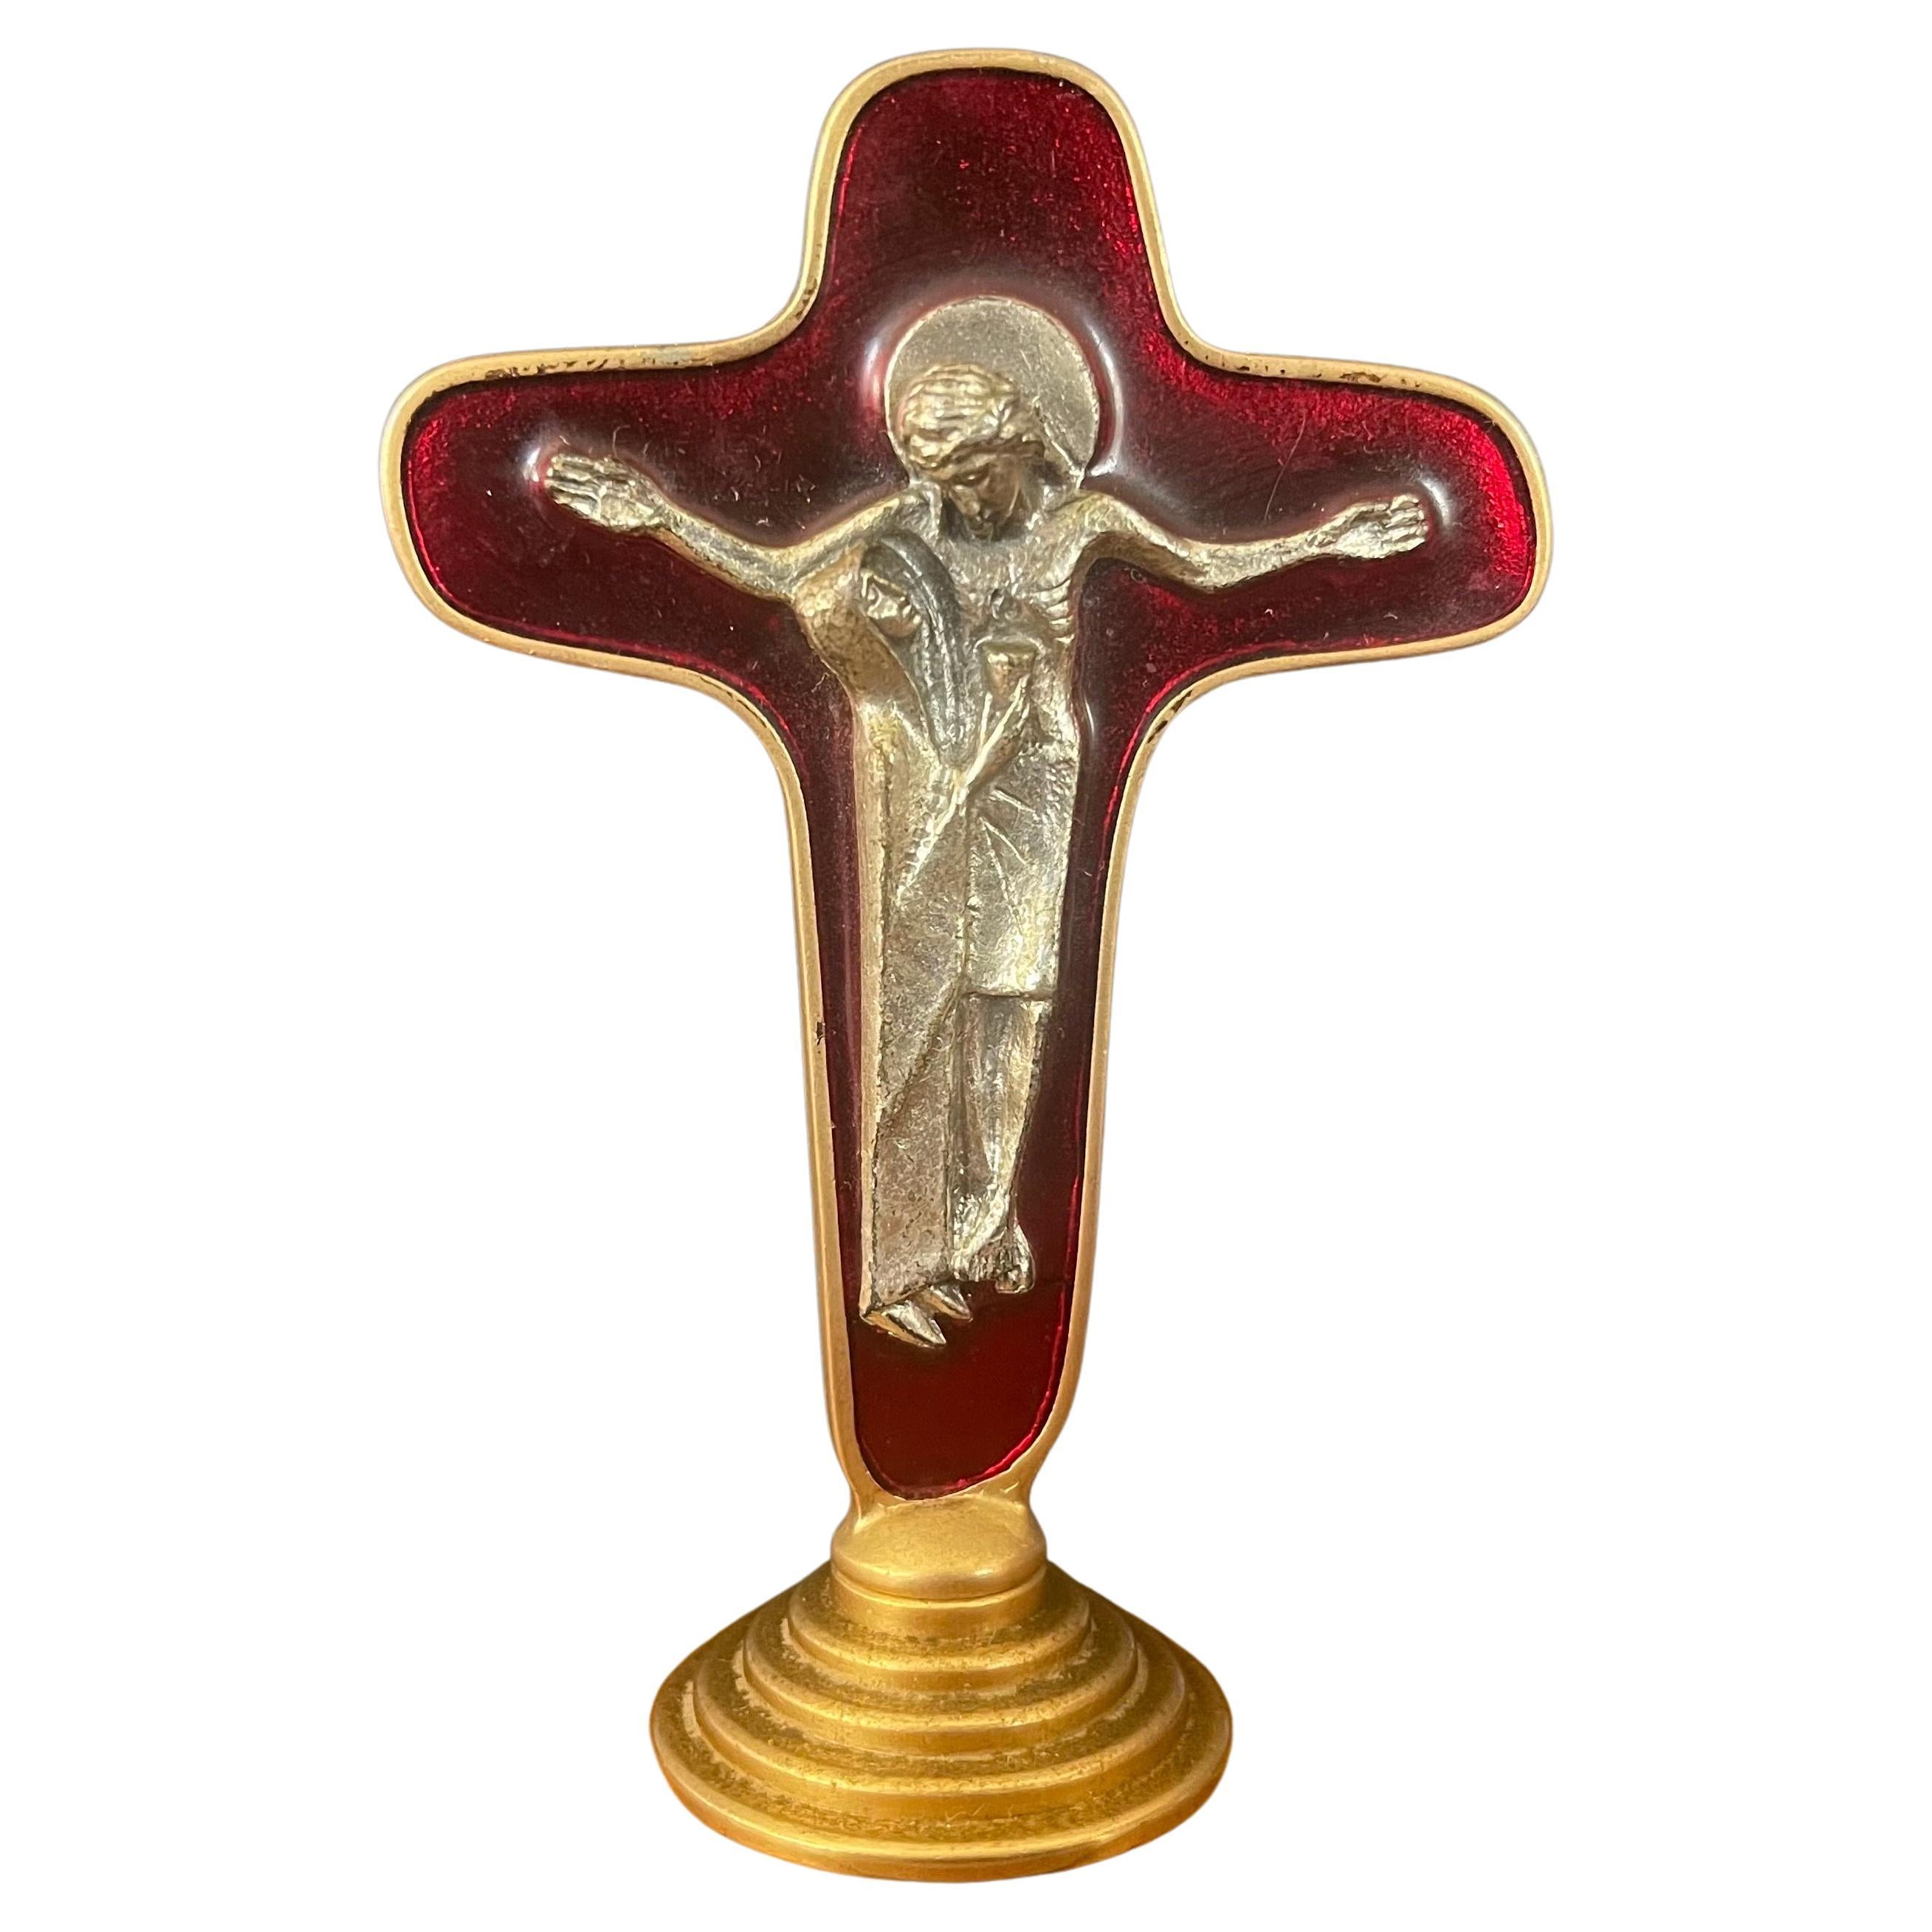 A very nice MCM petite red enamel and brass crucifix / cross on base, circa 1970s. Nice weight and detail. #2475